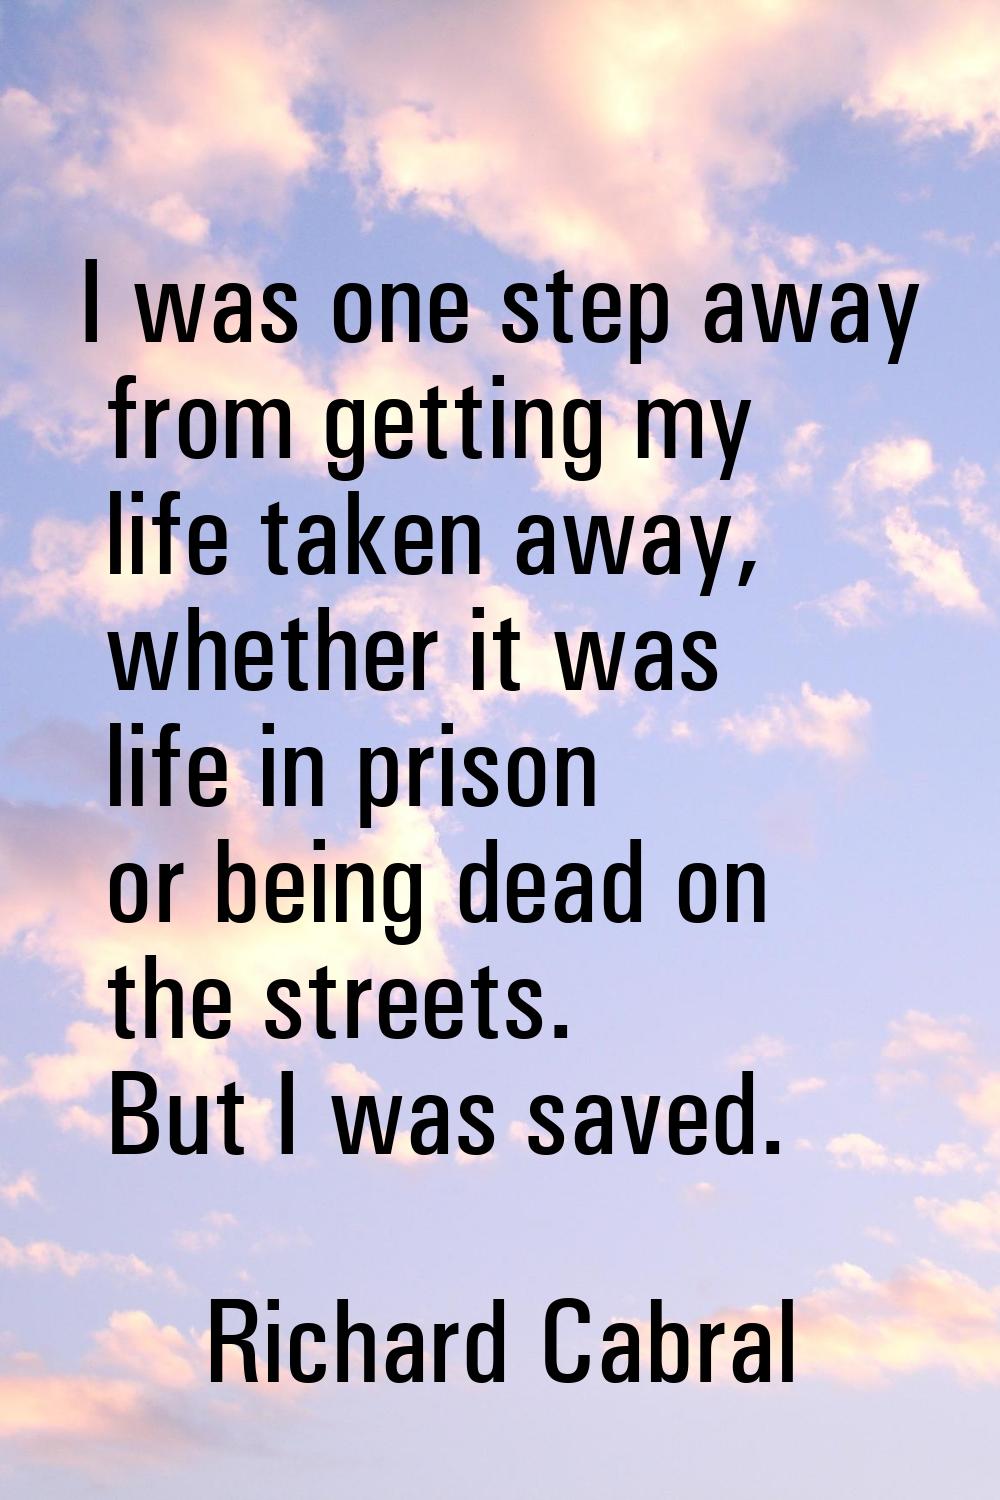 I was one step away from getting my life taken away, whether it was life in prison or being dead on